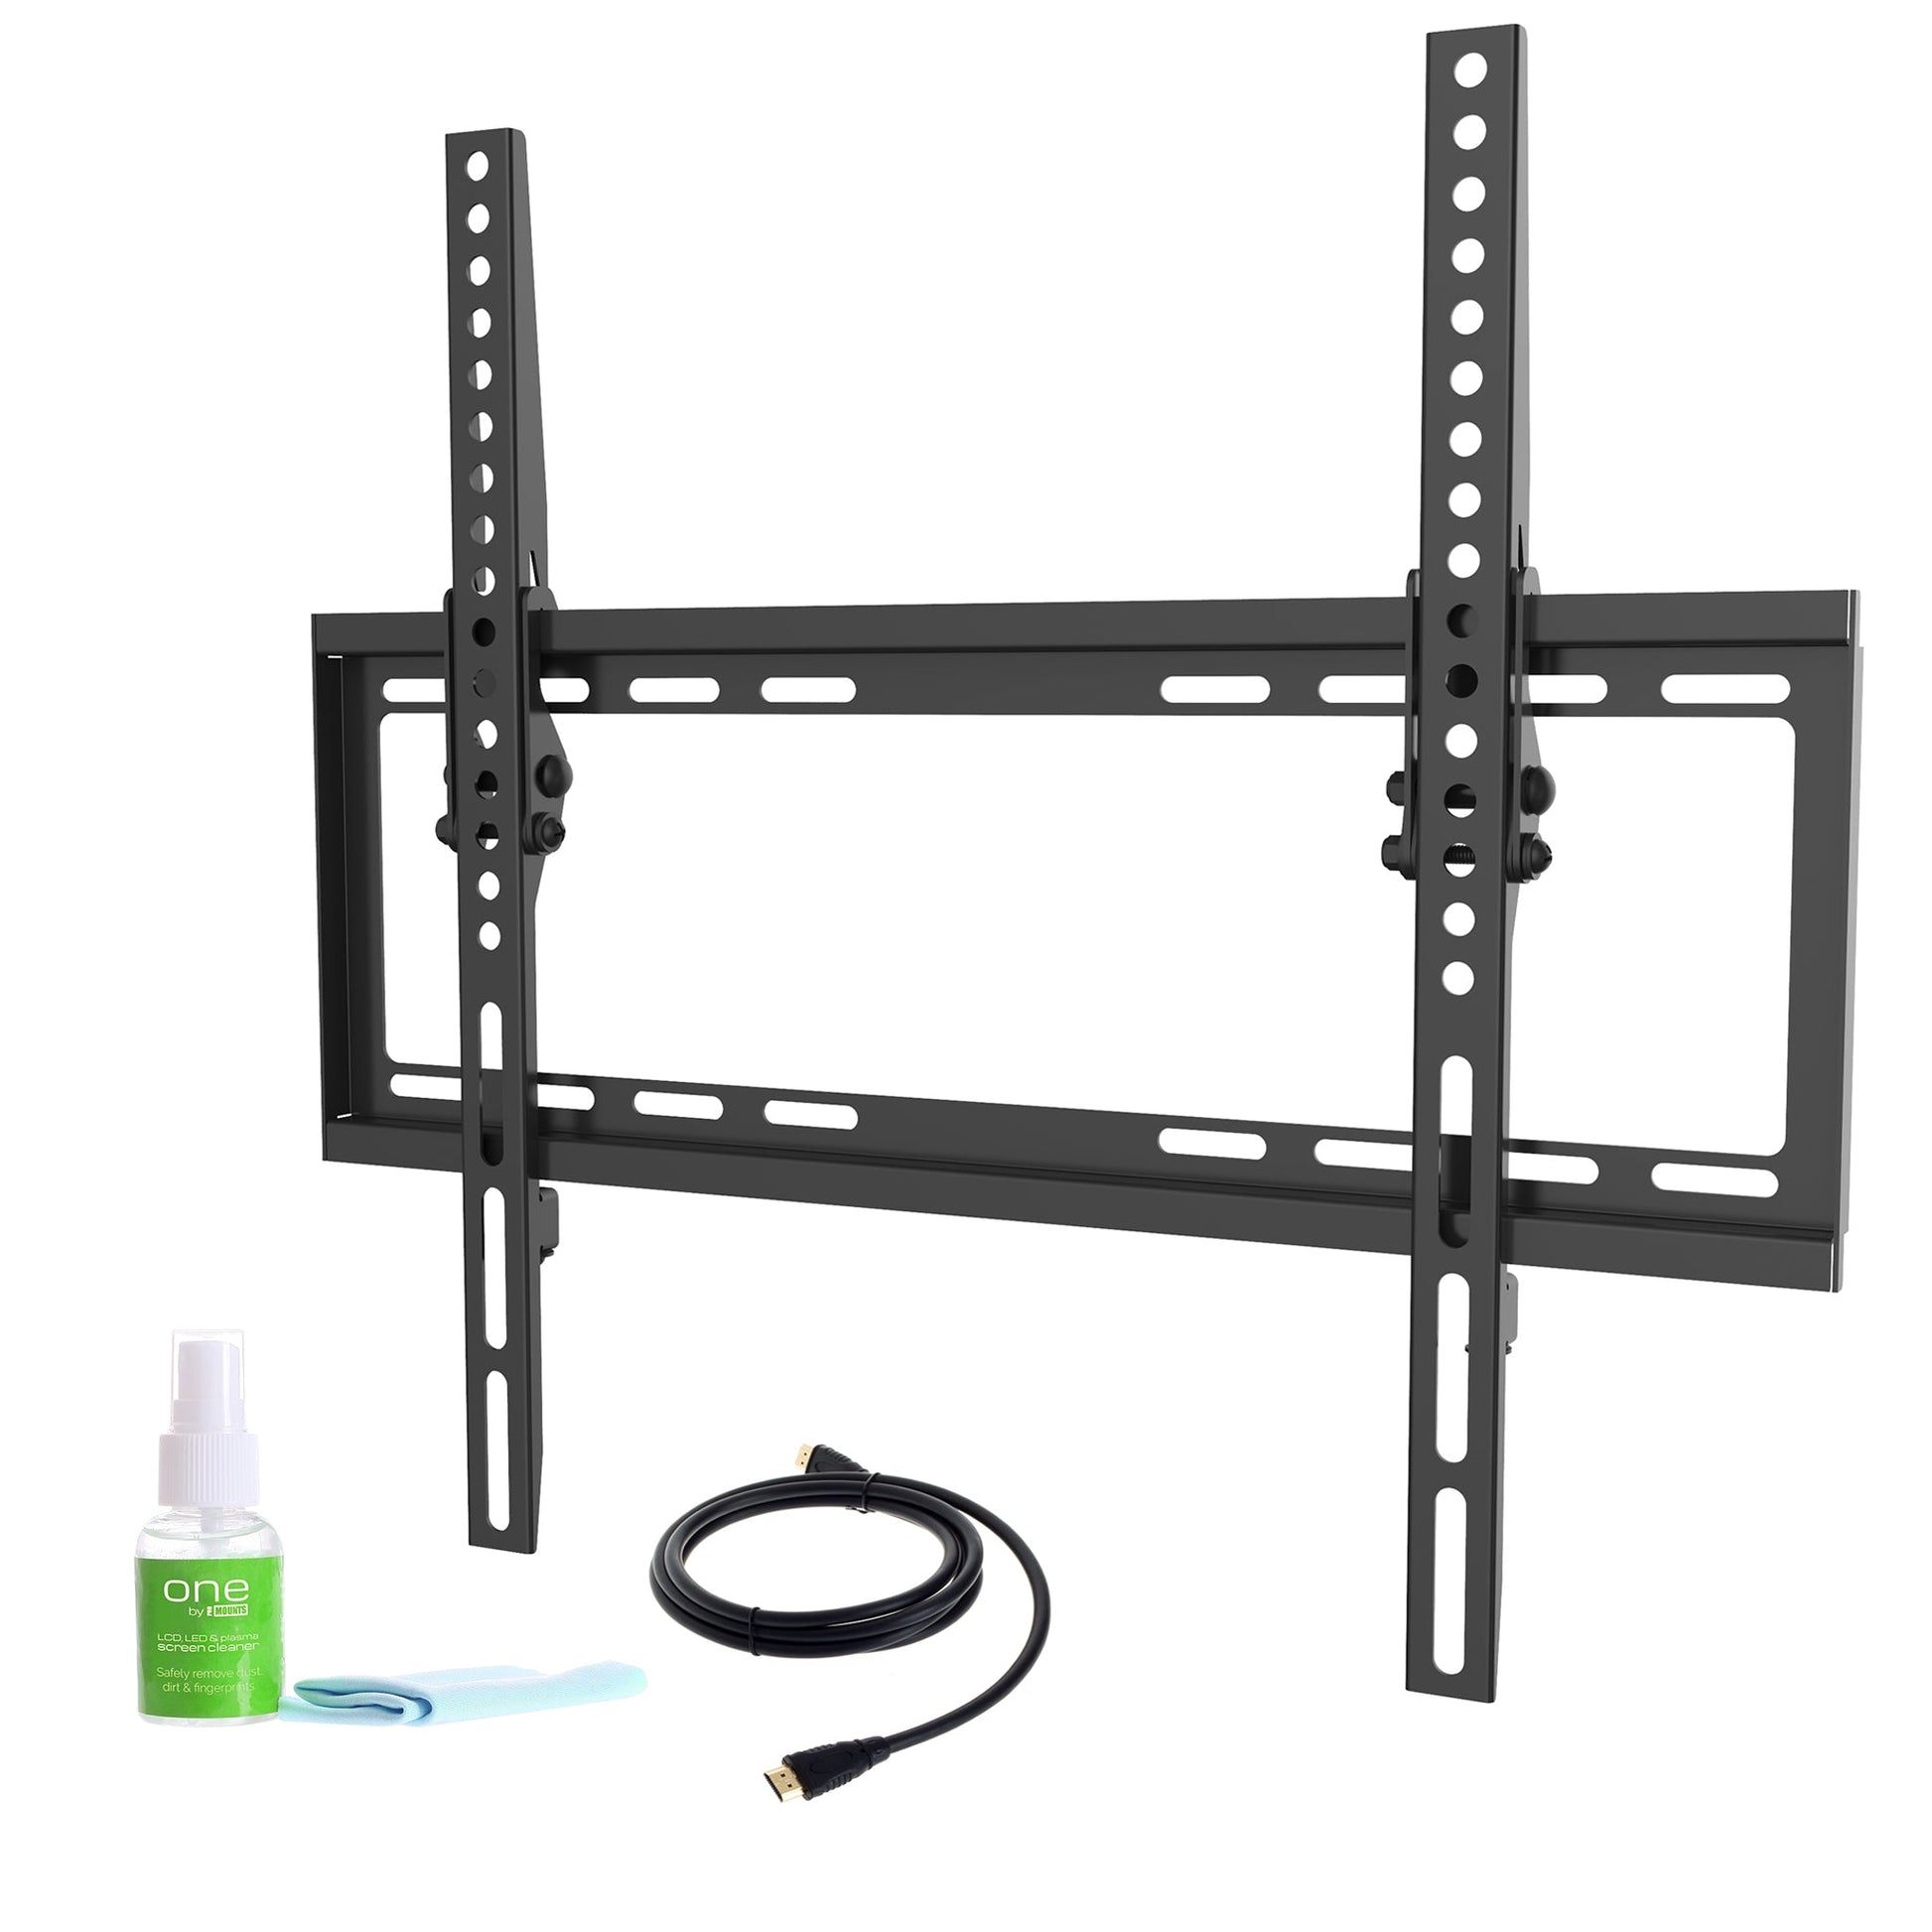 Tilt TV Wall Mount Kit (Mount, HDMI, Screen Cleaner) For 32" to 60" TVs up to 80lbs (MTMK) freeshipping - One Products